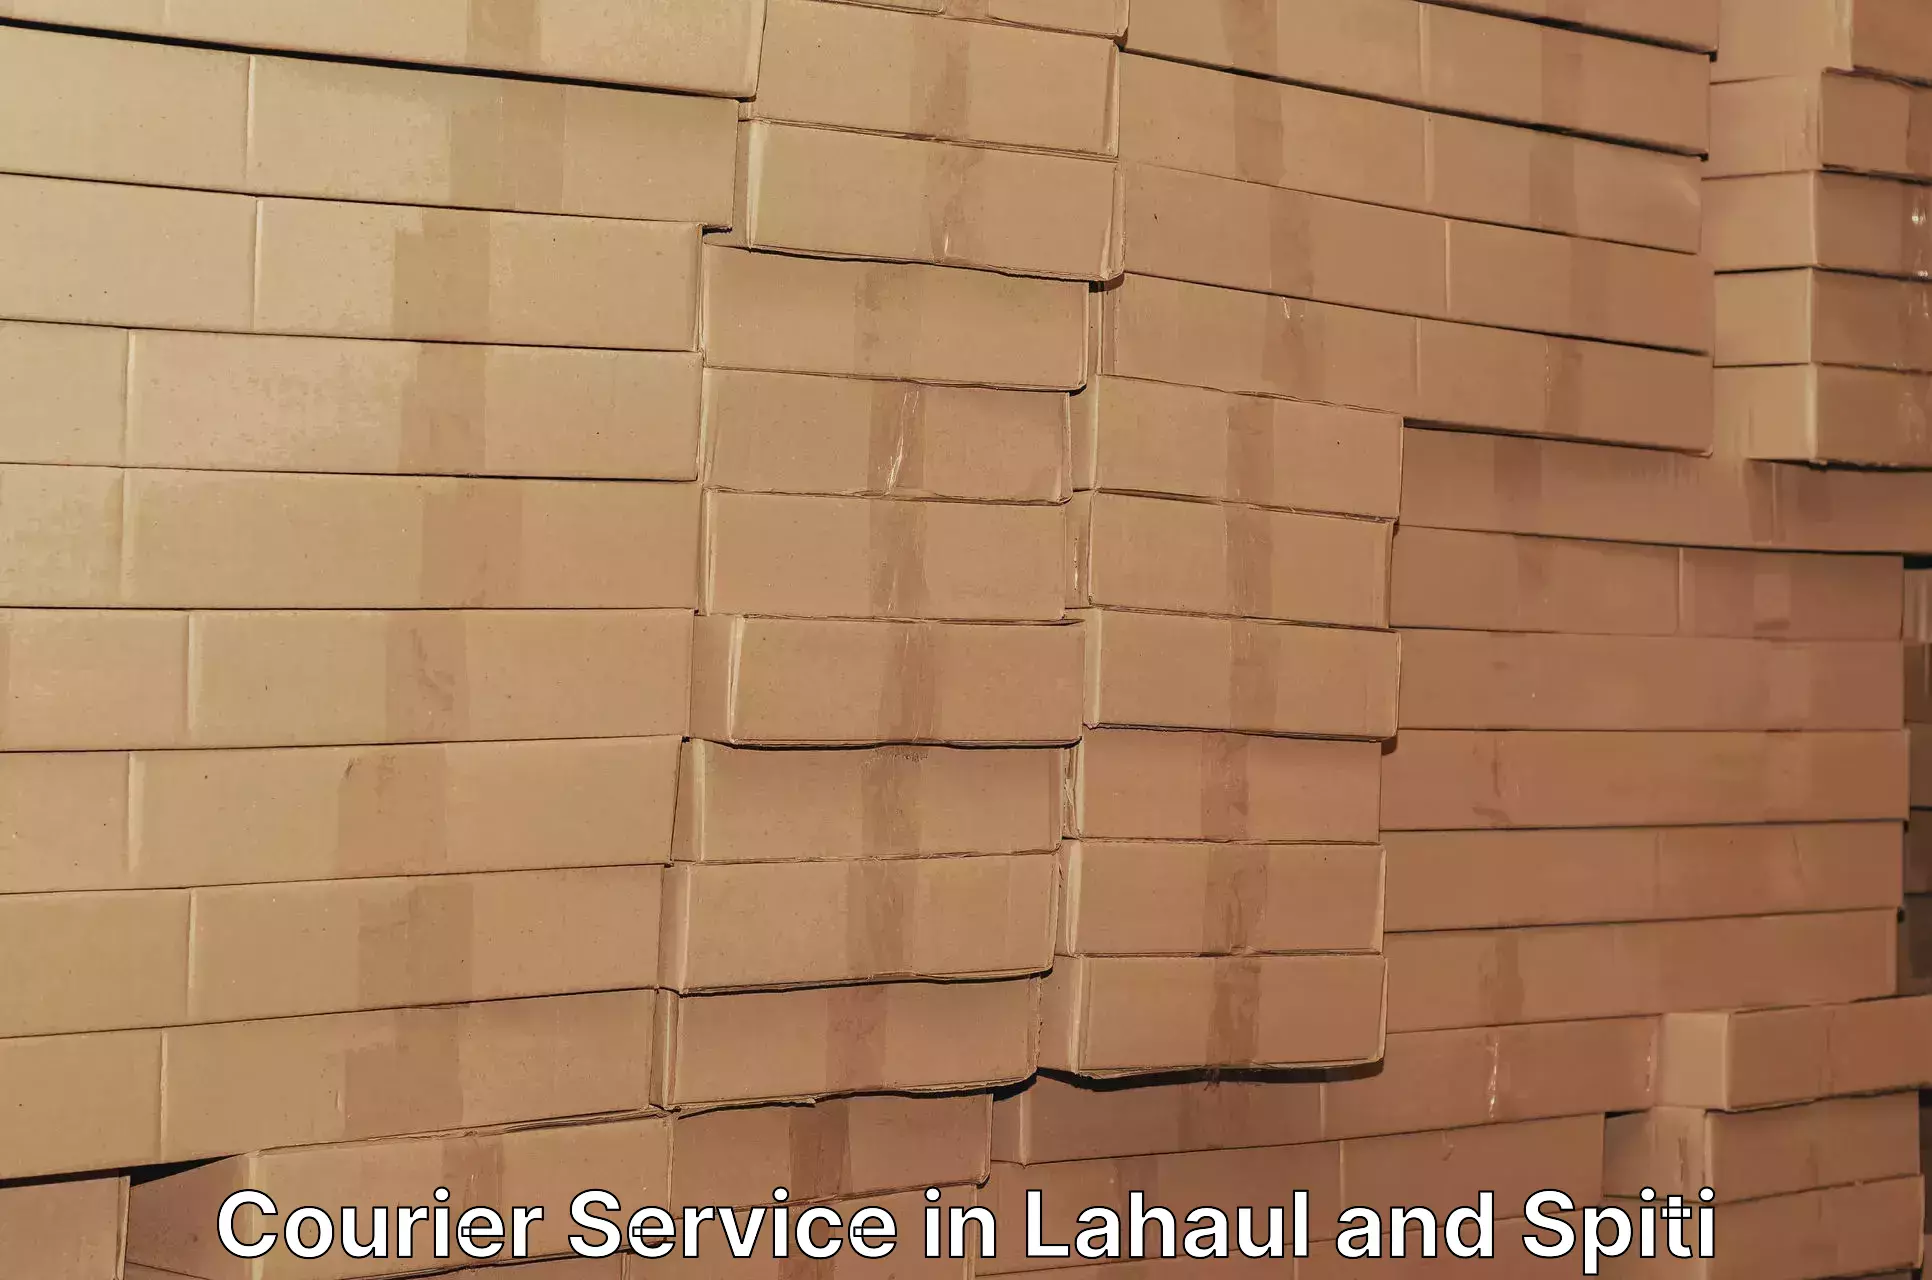 Global parcel delivery in Lahaul and Spiti